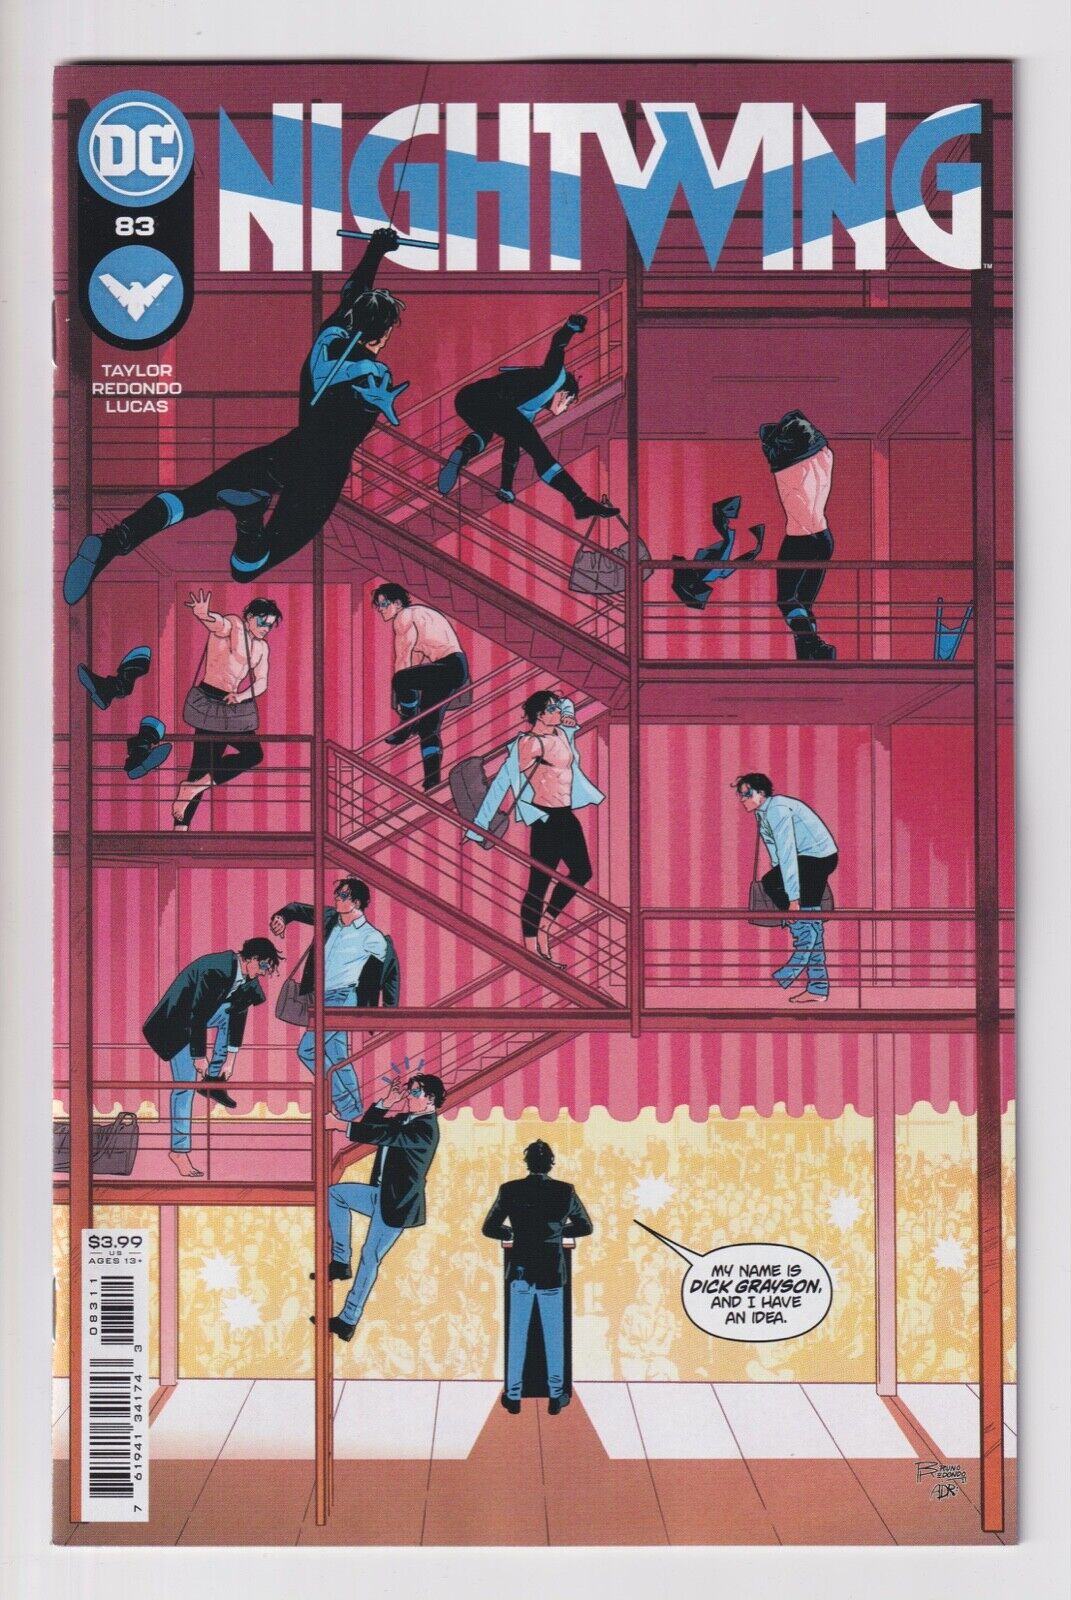 NIGHTWING 1-113 NM 2021 DC comics sold SEPARATELY you PICK